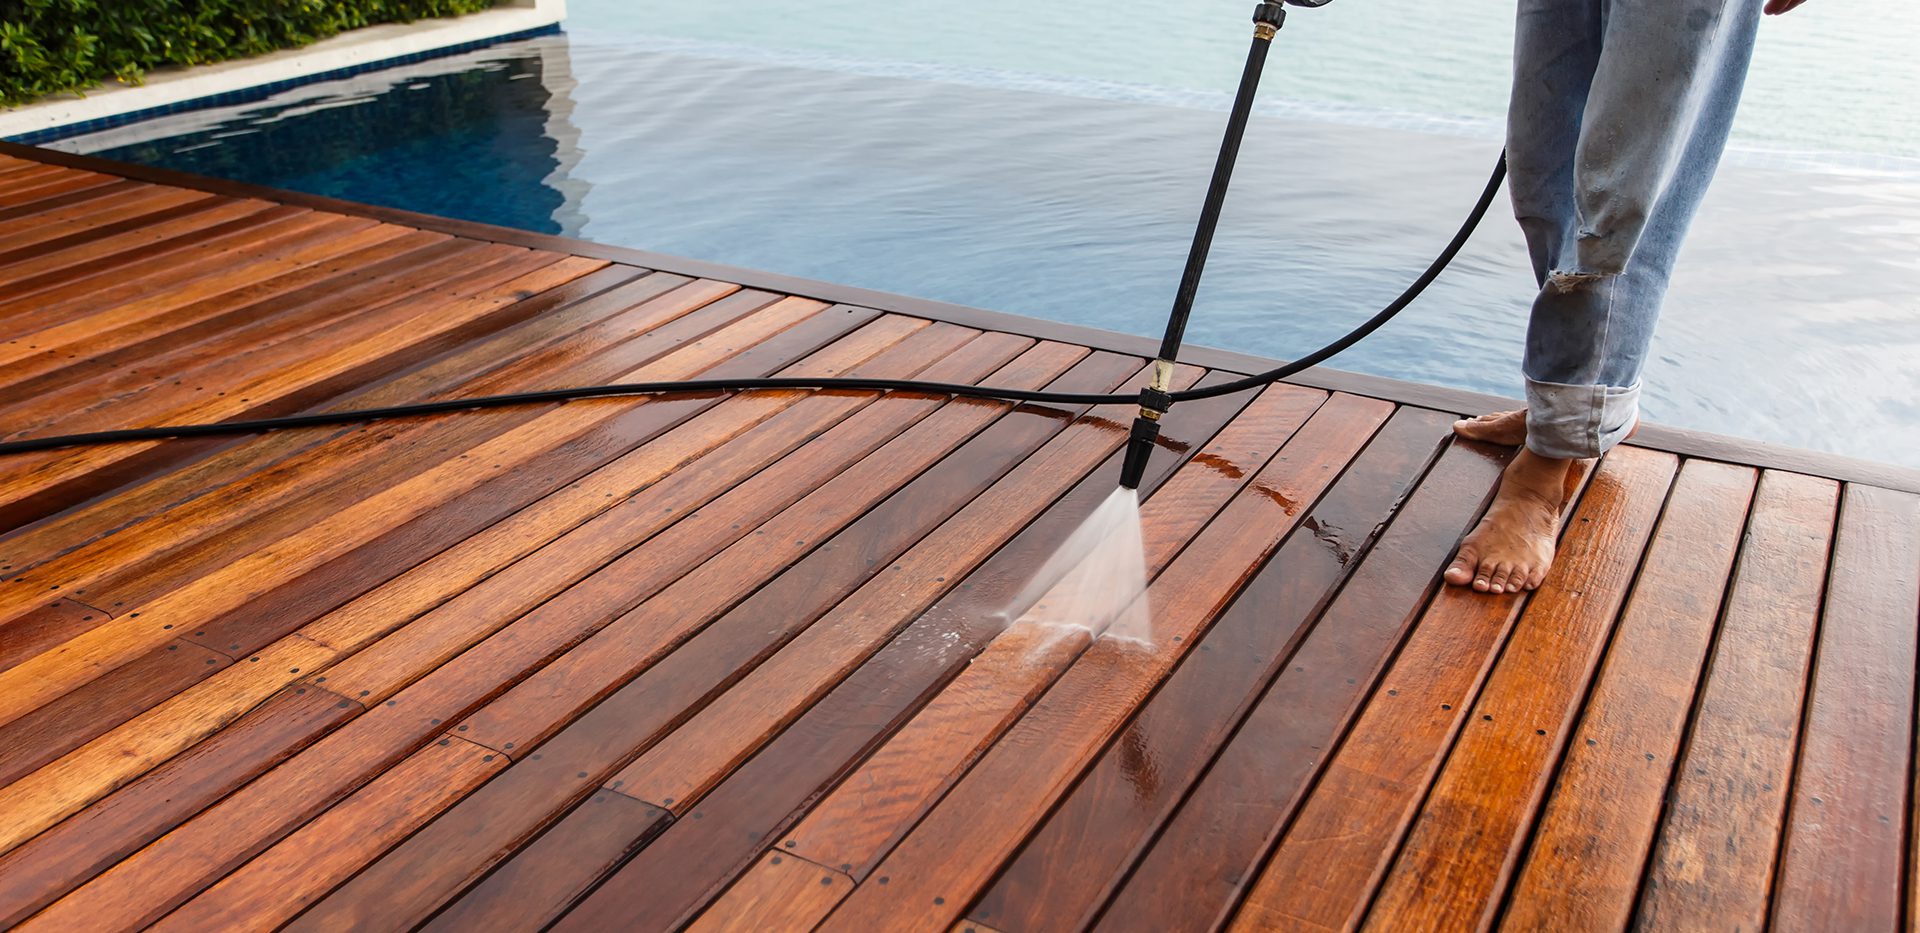 Deck Cleaning & Staining Services in Holmdel, NJ